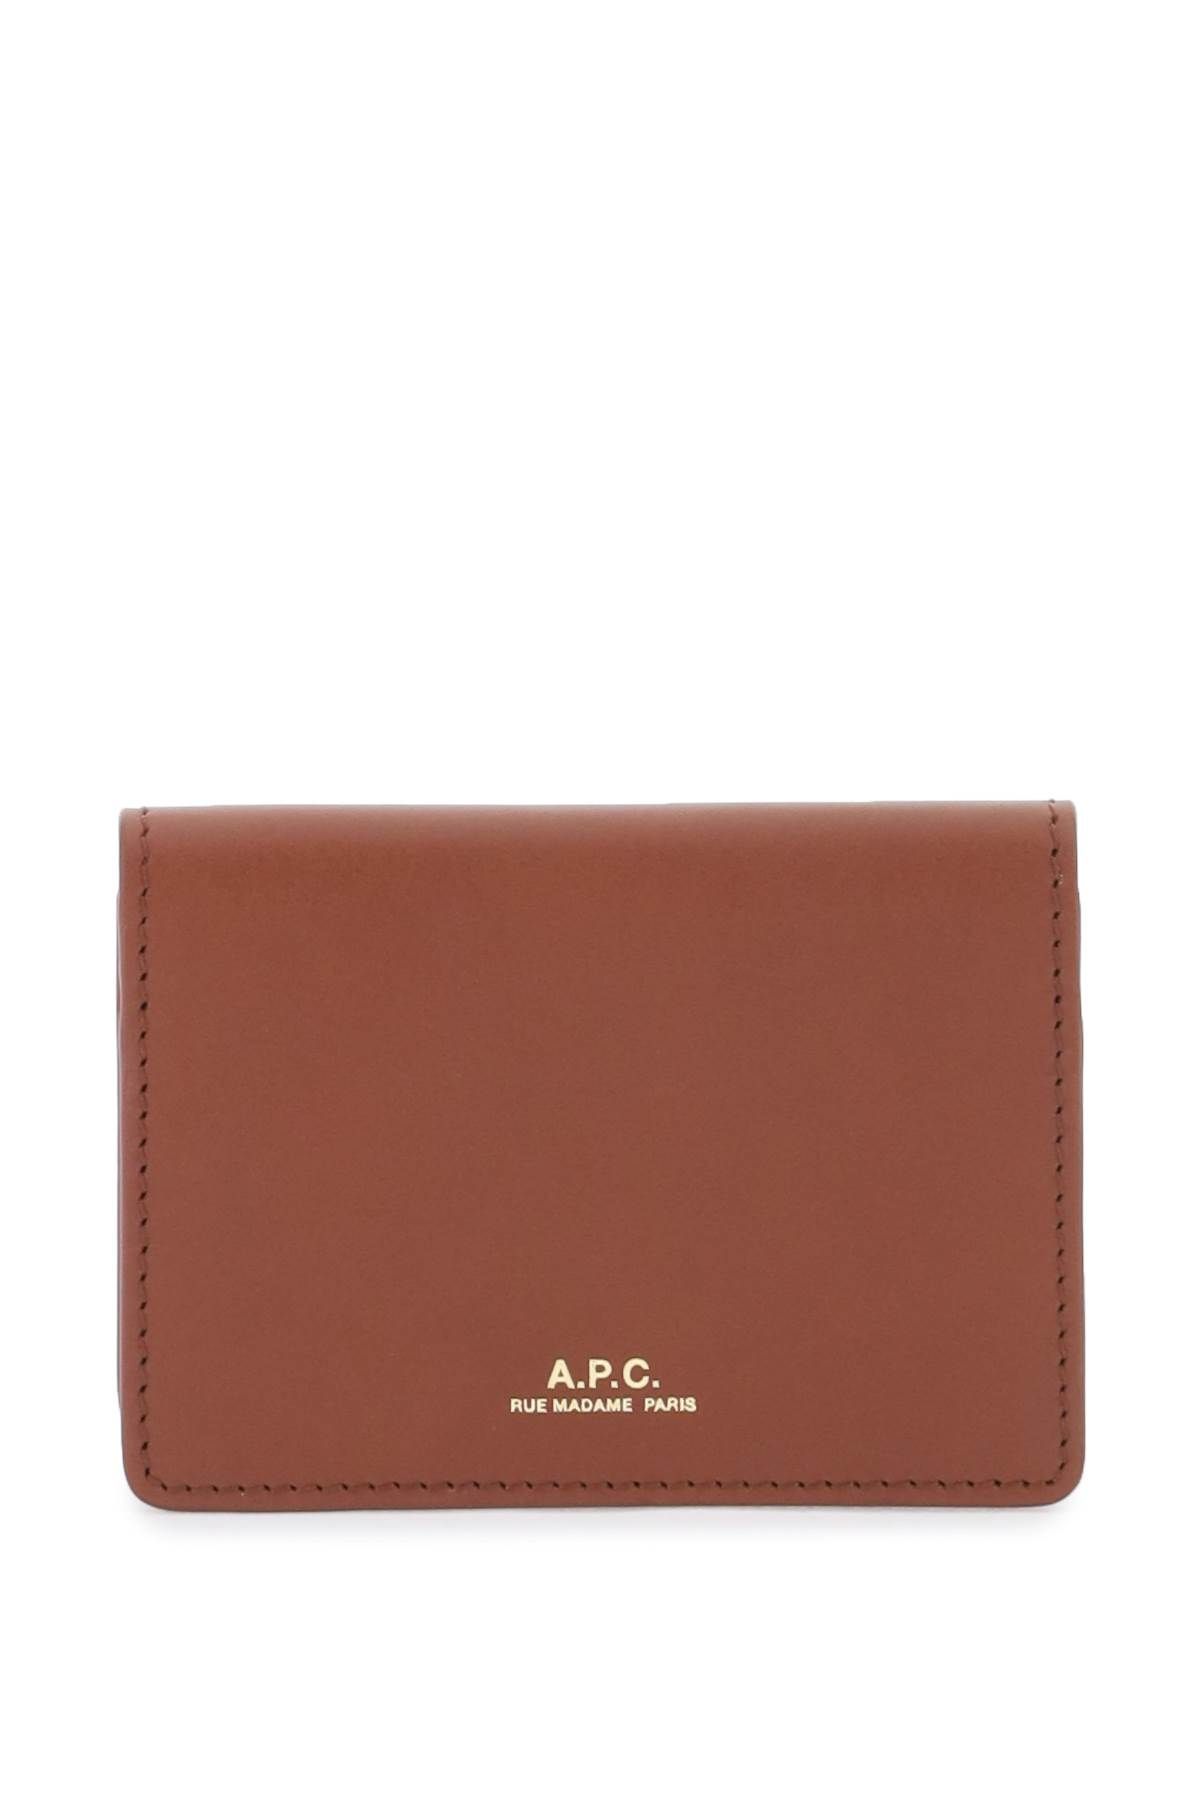 A. P.C. leather stefan card holder